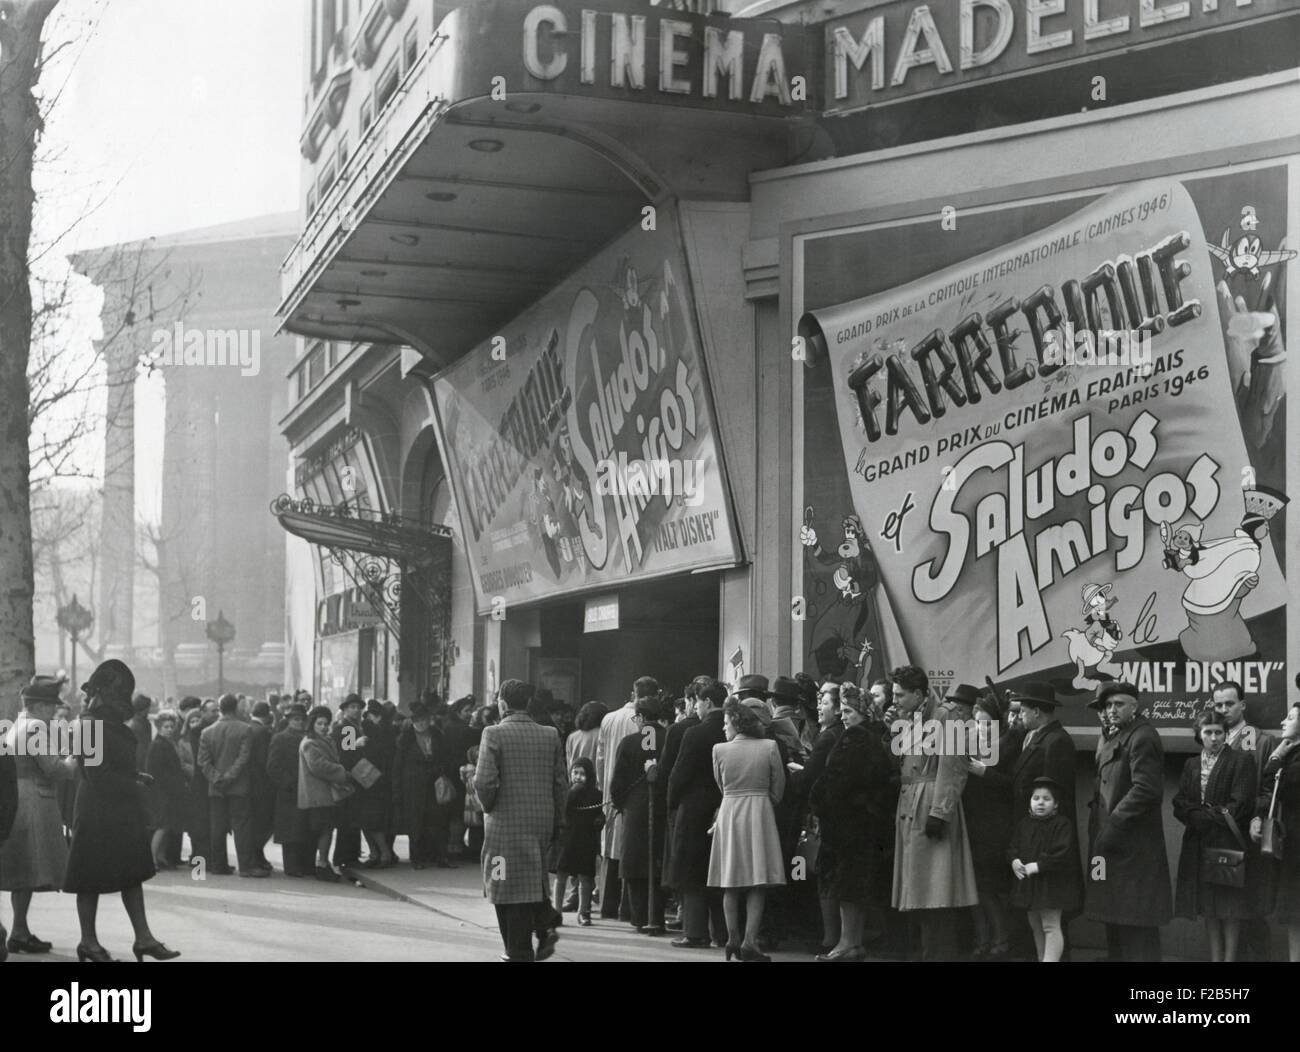 Parisiennes at a movie theater showing the Disney film, 'Saludos Amigos' in April 1947. At the Madeleine Cinema, Boulevard des Capucines, Paris. - (BSLOC 2014 17 126) Stock Photo